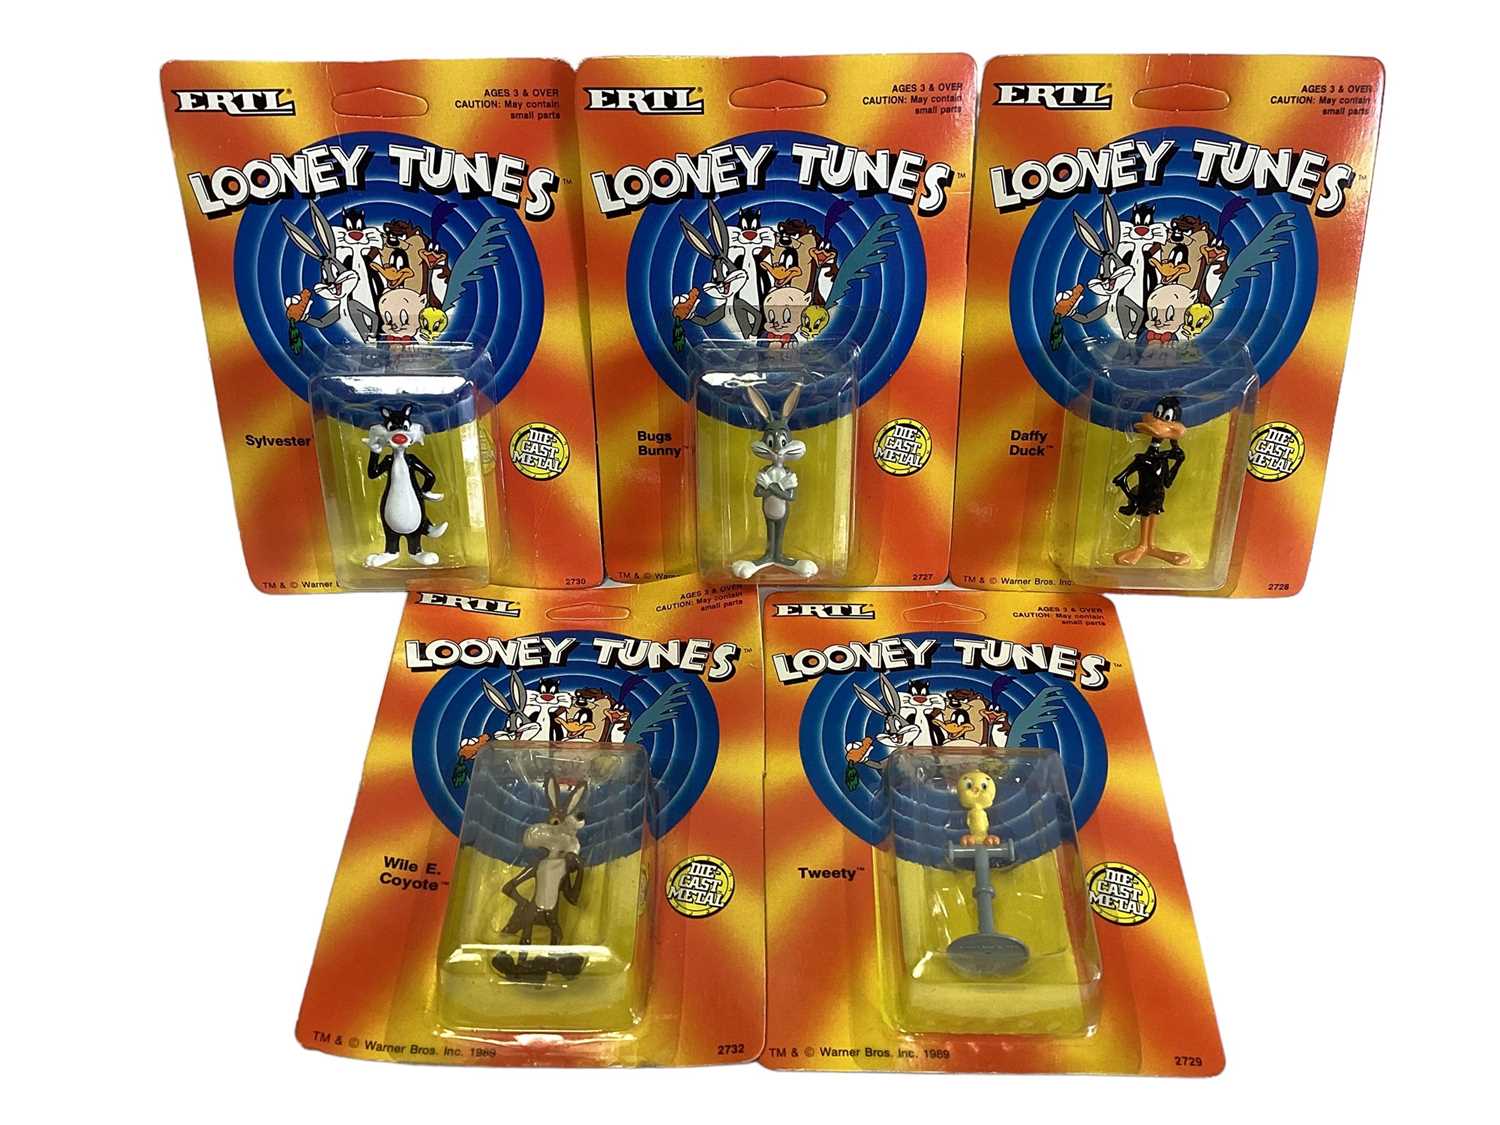 ERTL Warner Bros Looney Toons Characters, on card with bubblepack (11) - Image 2 of 2